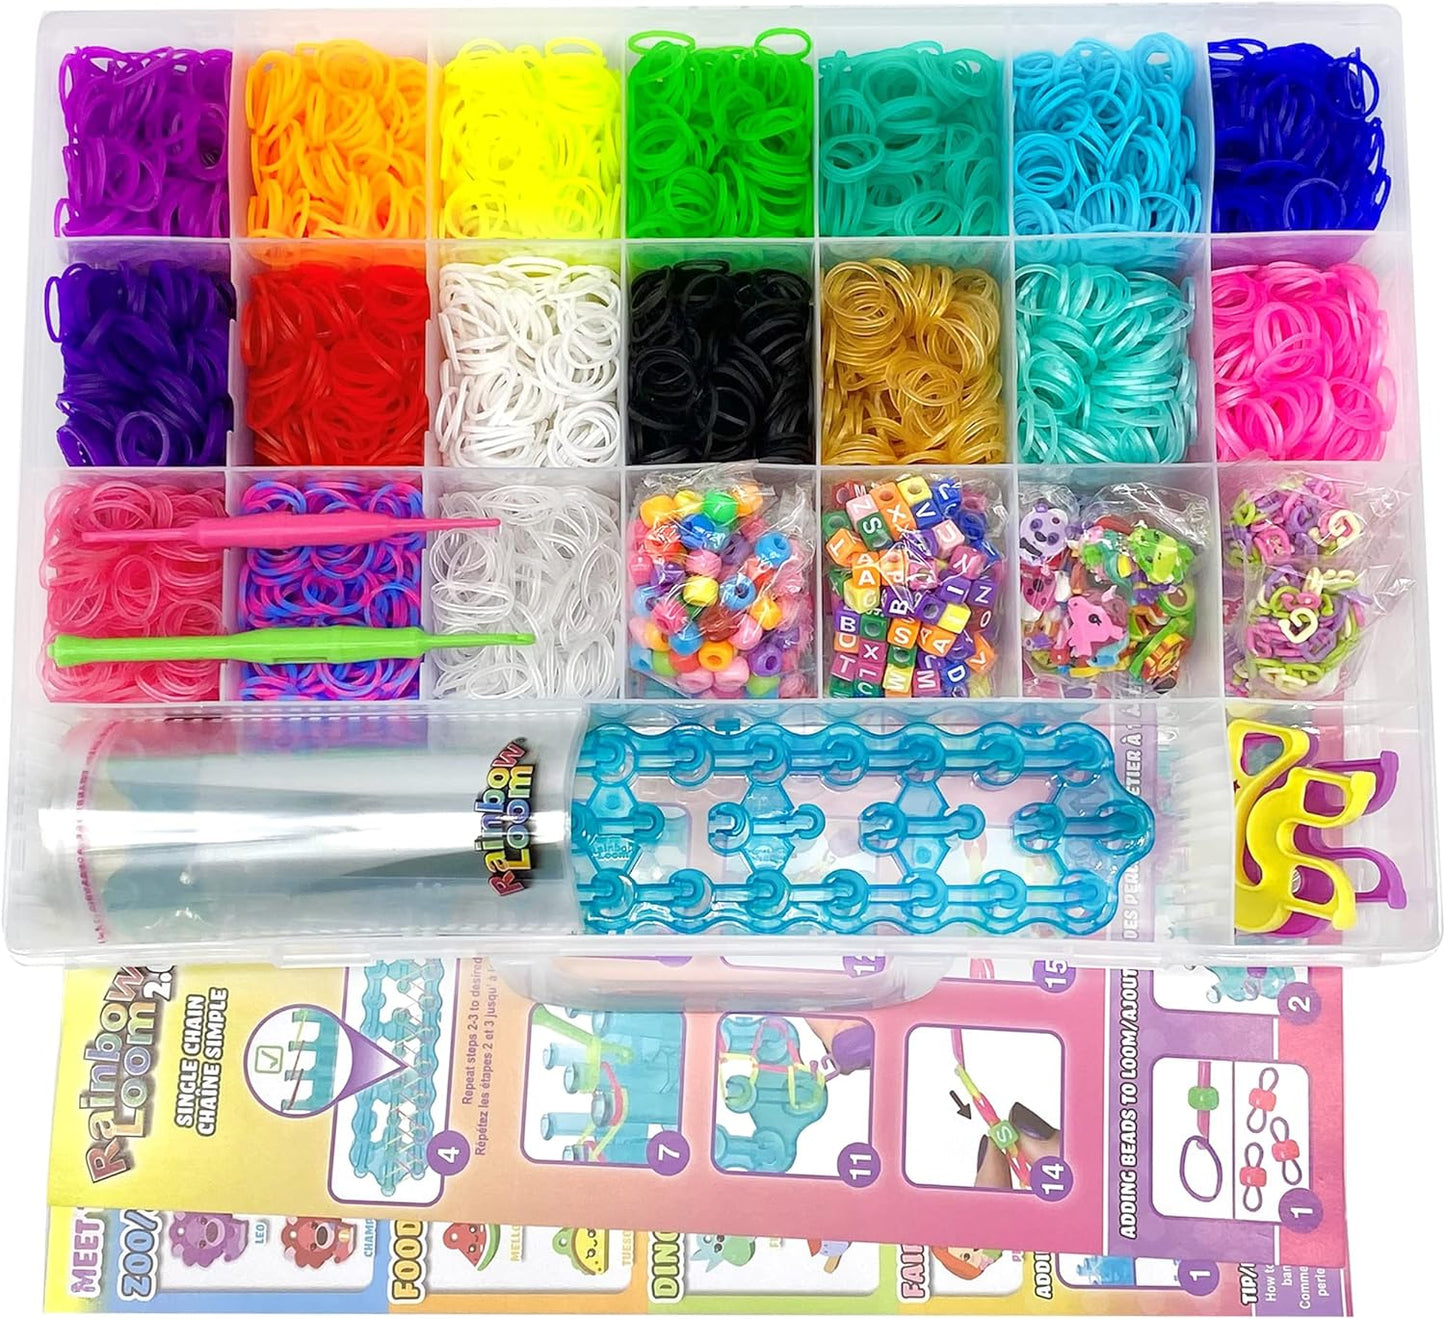 Rainbow Loom® Loomi-Pals™ MEGA Set, Alpha & Pony Beads, 5600 Colorful Bands All in a Carrying Case for Boys and Girls 7+